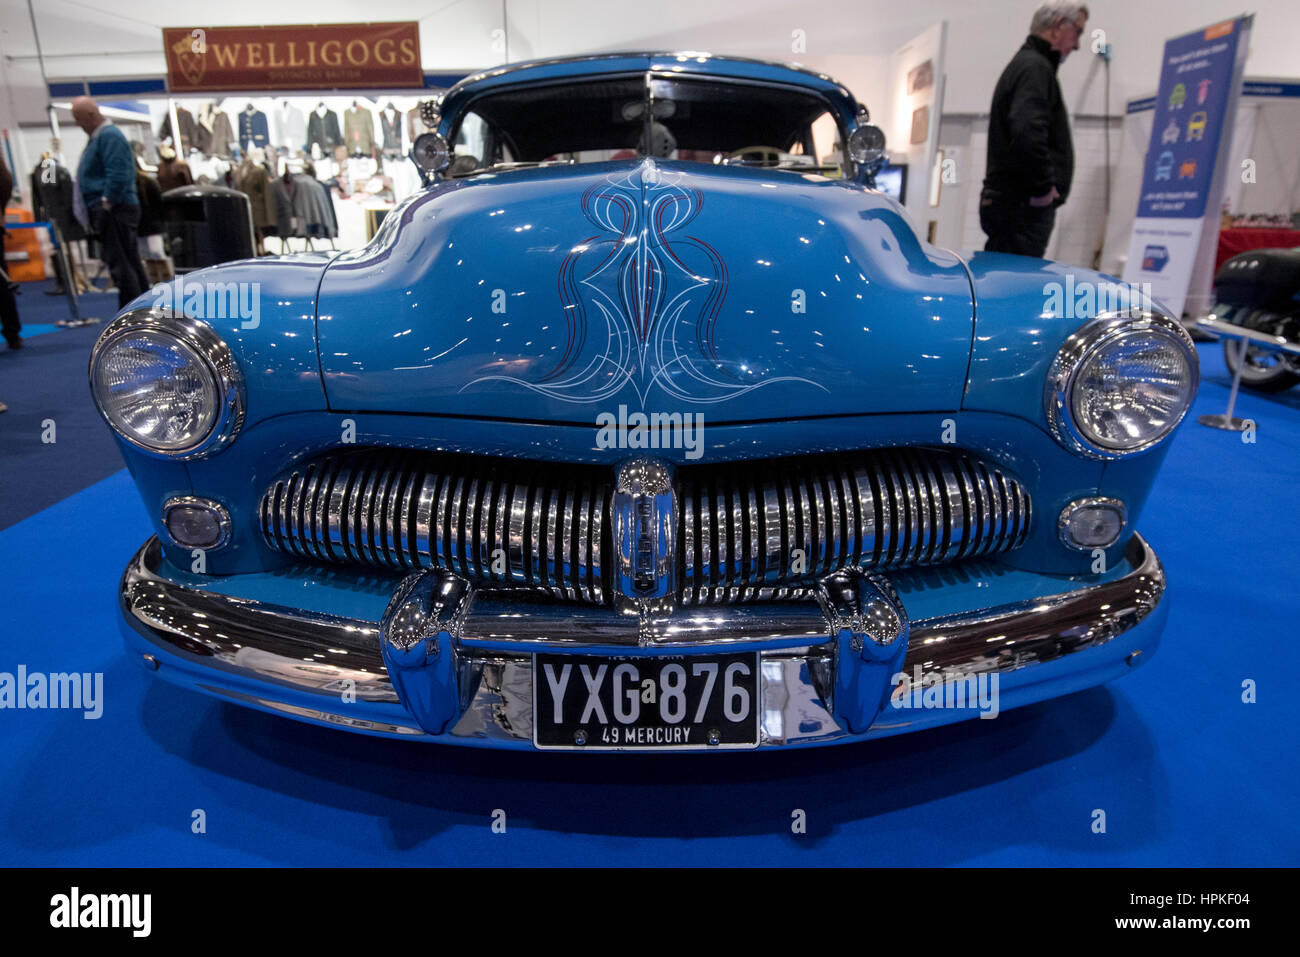 London, UK.  23 February 2017. A 1949 Lincoln Mercury on display at the London Classic Car Show at Excel, Docklands.   Now in its third year, the four day event is aimed at the discerning classic car owner, collector, expert or enthusiast and is an international celebration of the very best dealers, manufacturers, car clubs and products.   Credit: Stephen Chung / Alamy Live News Stock Photo